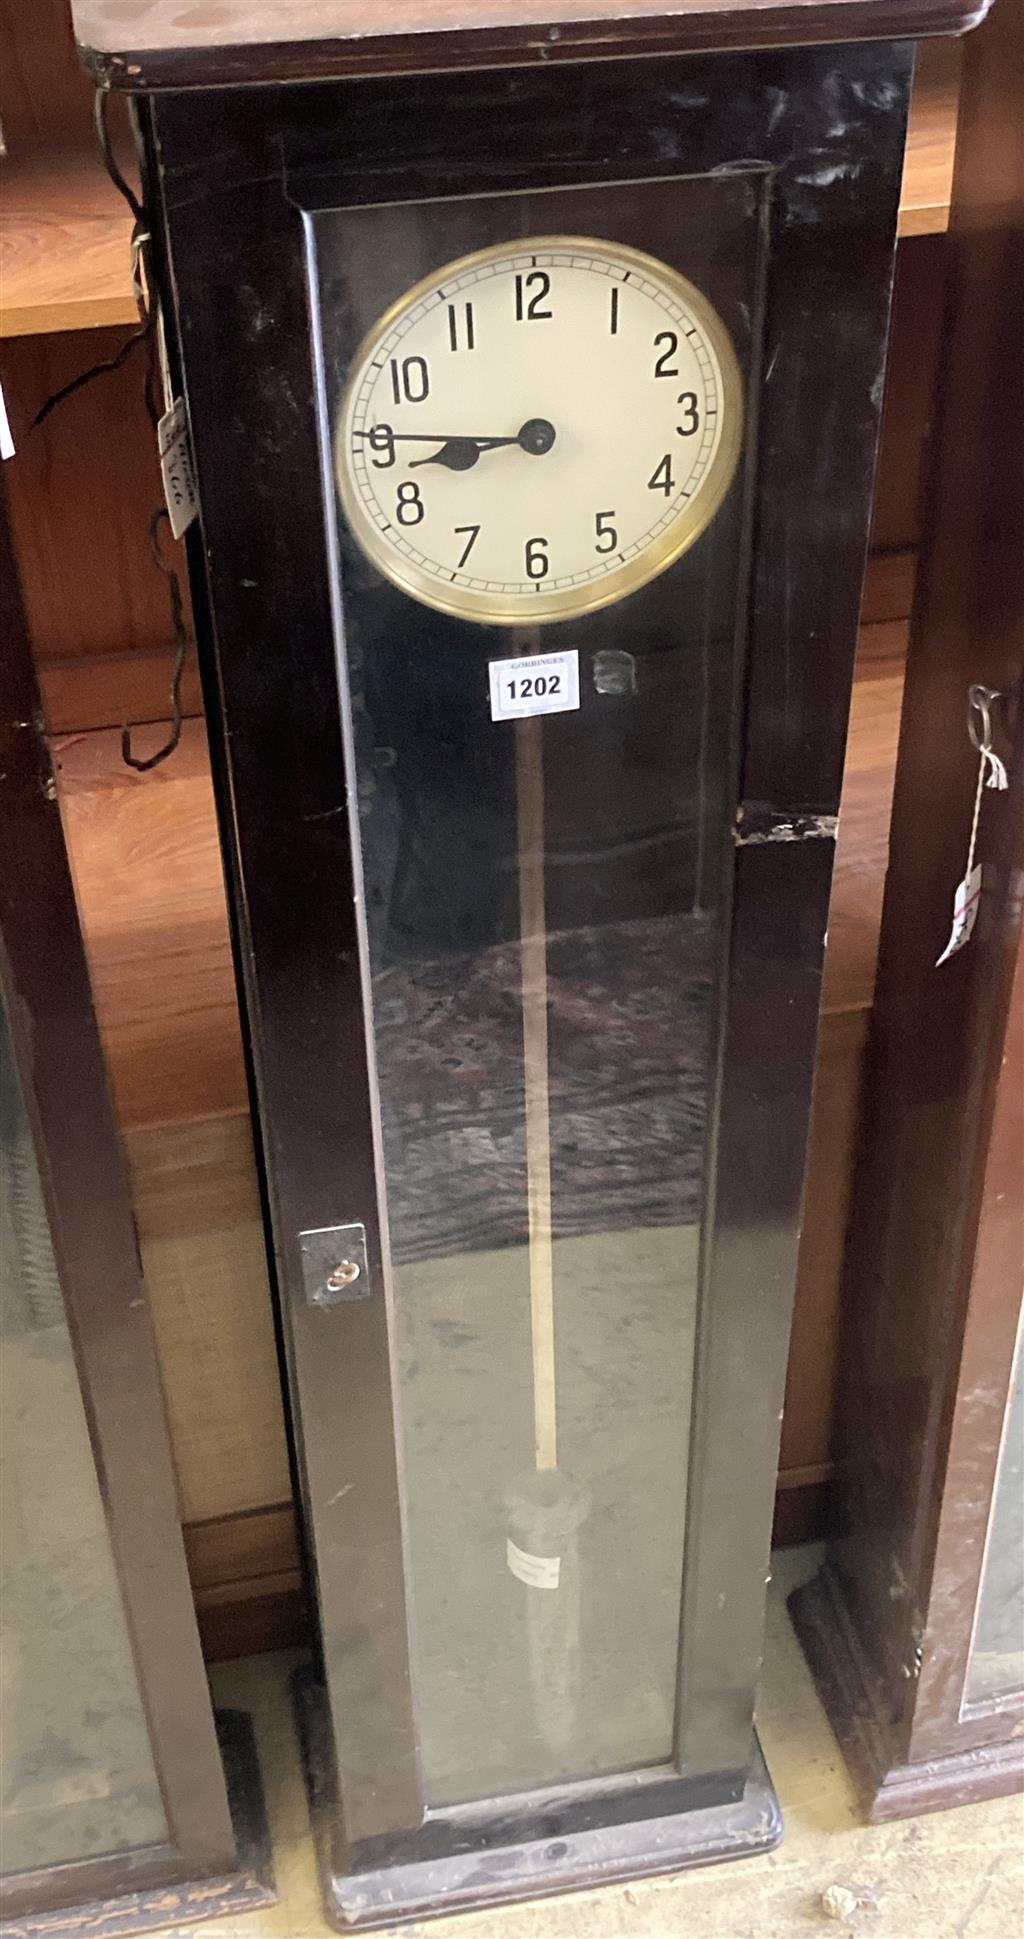 A Pul-Syn-Etic Impulse electric master clock in a beech case, with label for date and manufacture, 29-3-47, height 137cm. with pendulum